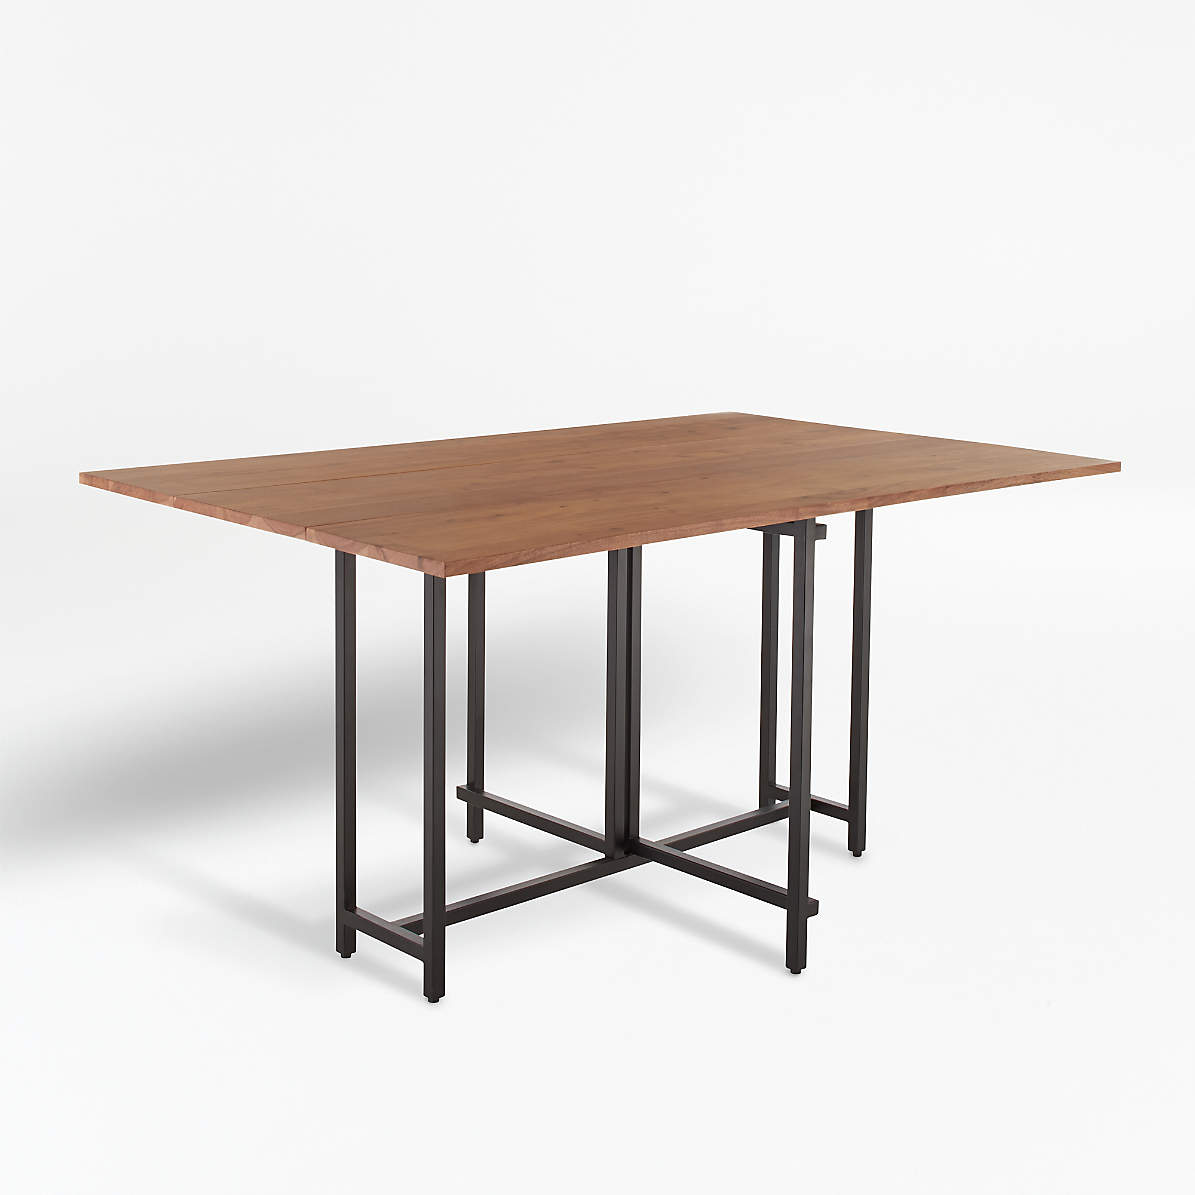 Origami Drop Leaf Rectangular Dining Table Reviews Crate And Barrel